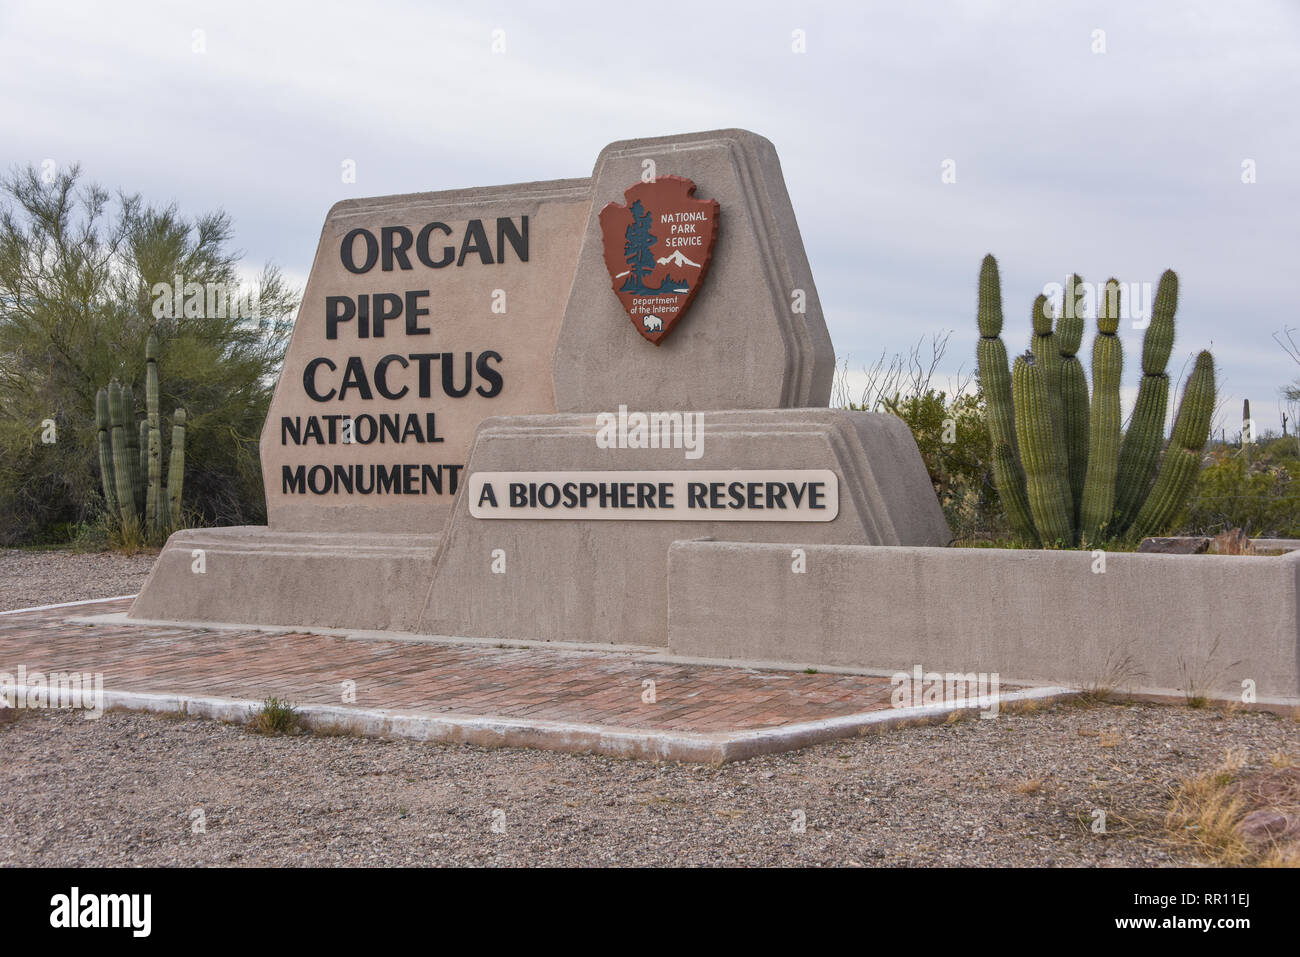 Entrance Sign for Organ Pipe Cactus National Monument and Biosphere Reserve near Lukeville, South Central Arizona Stock Photo